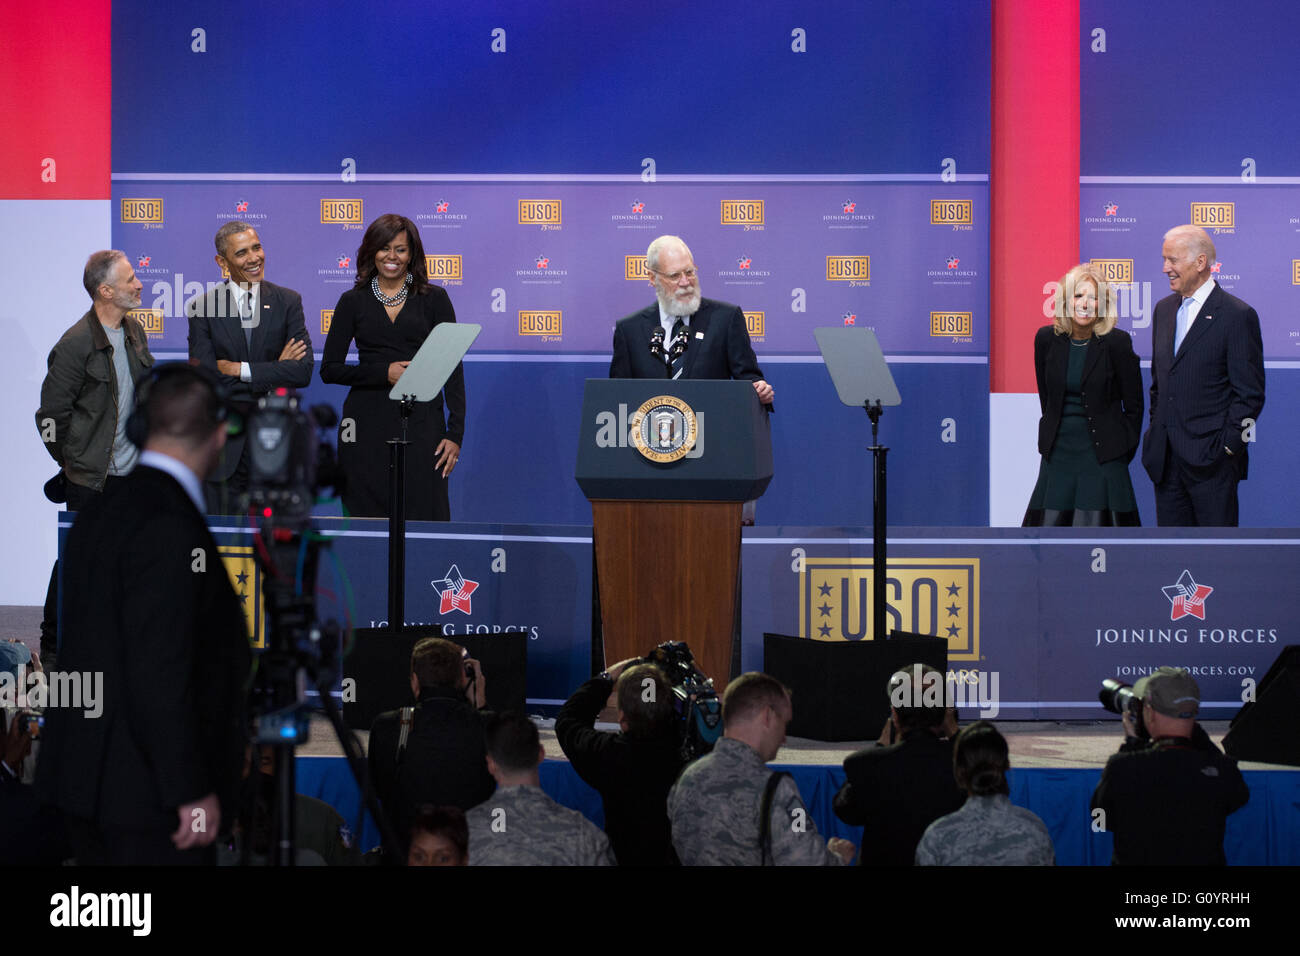 Washington DC, USA. 5th May, 2016. Former Late Show Host David Letterman does a stand up routine during a comedy show in celebration of the 75th anniversary of the USO and the 5th anniversary of Joining Forces at Joint Base Andrews May 5, 2016 in Washington, D.C. Joining Letterman on stage are (L-R): Comedian Jon Stewart, President Barack Obama, First Lady Michelle Obama, Dr. Jill Biden and Vice President Joe Biden. Credit:  Planetpix/Alamy Live News Stock Photo